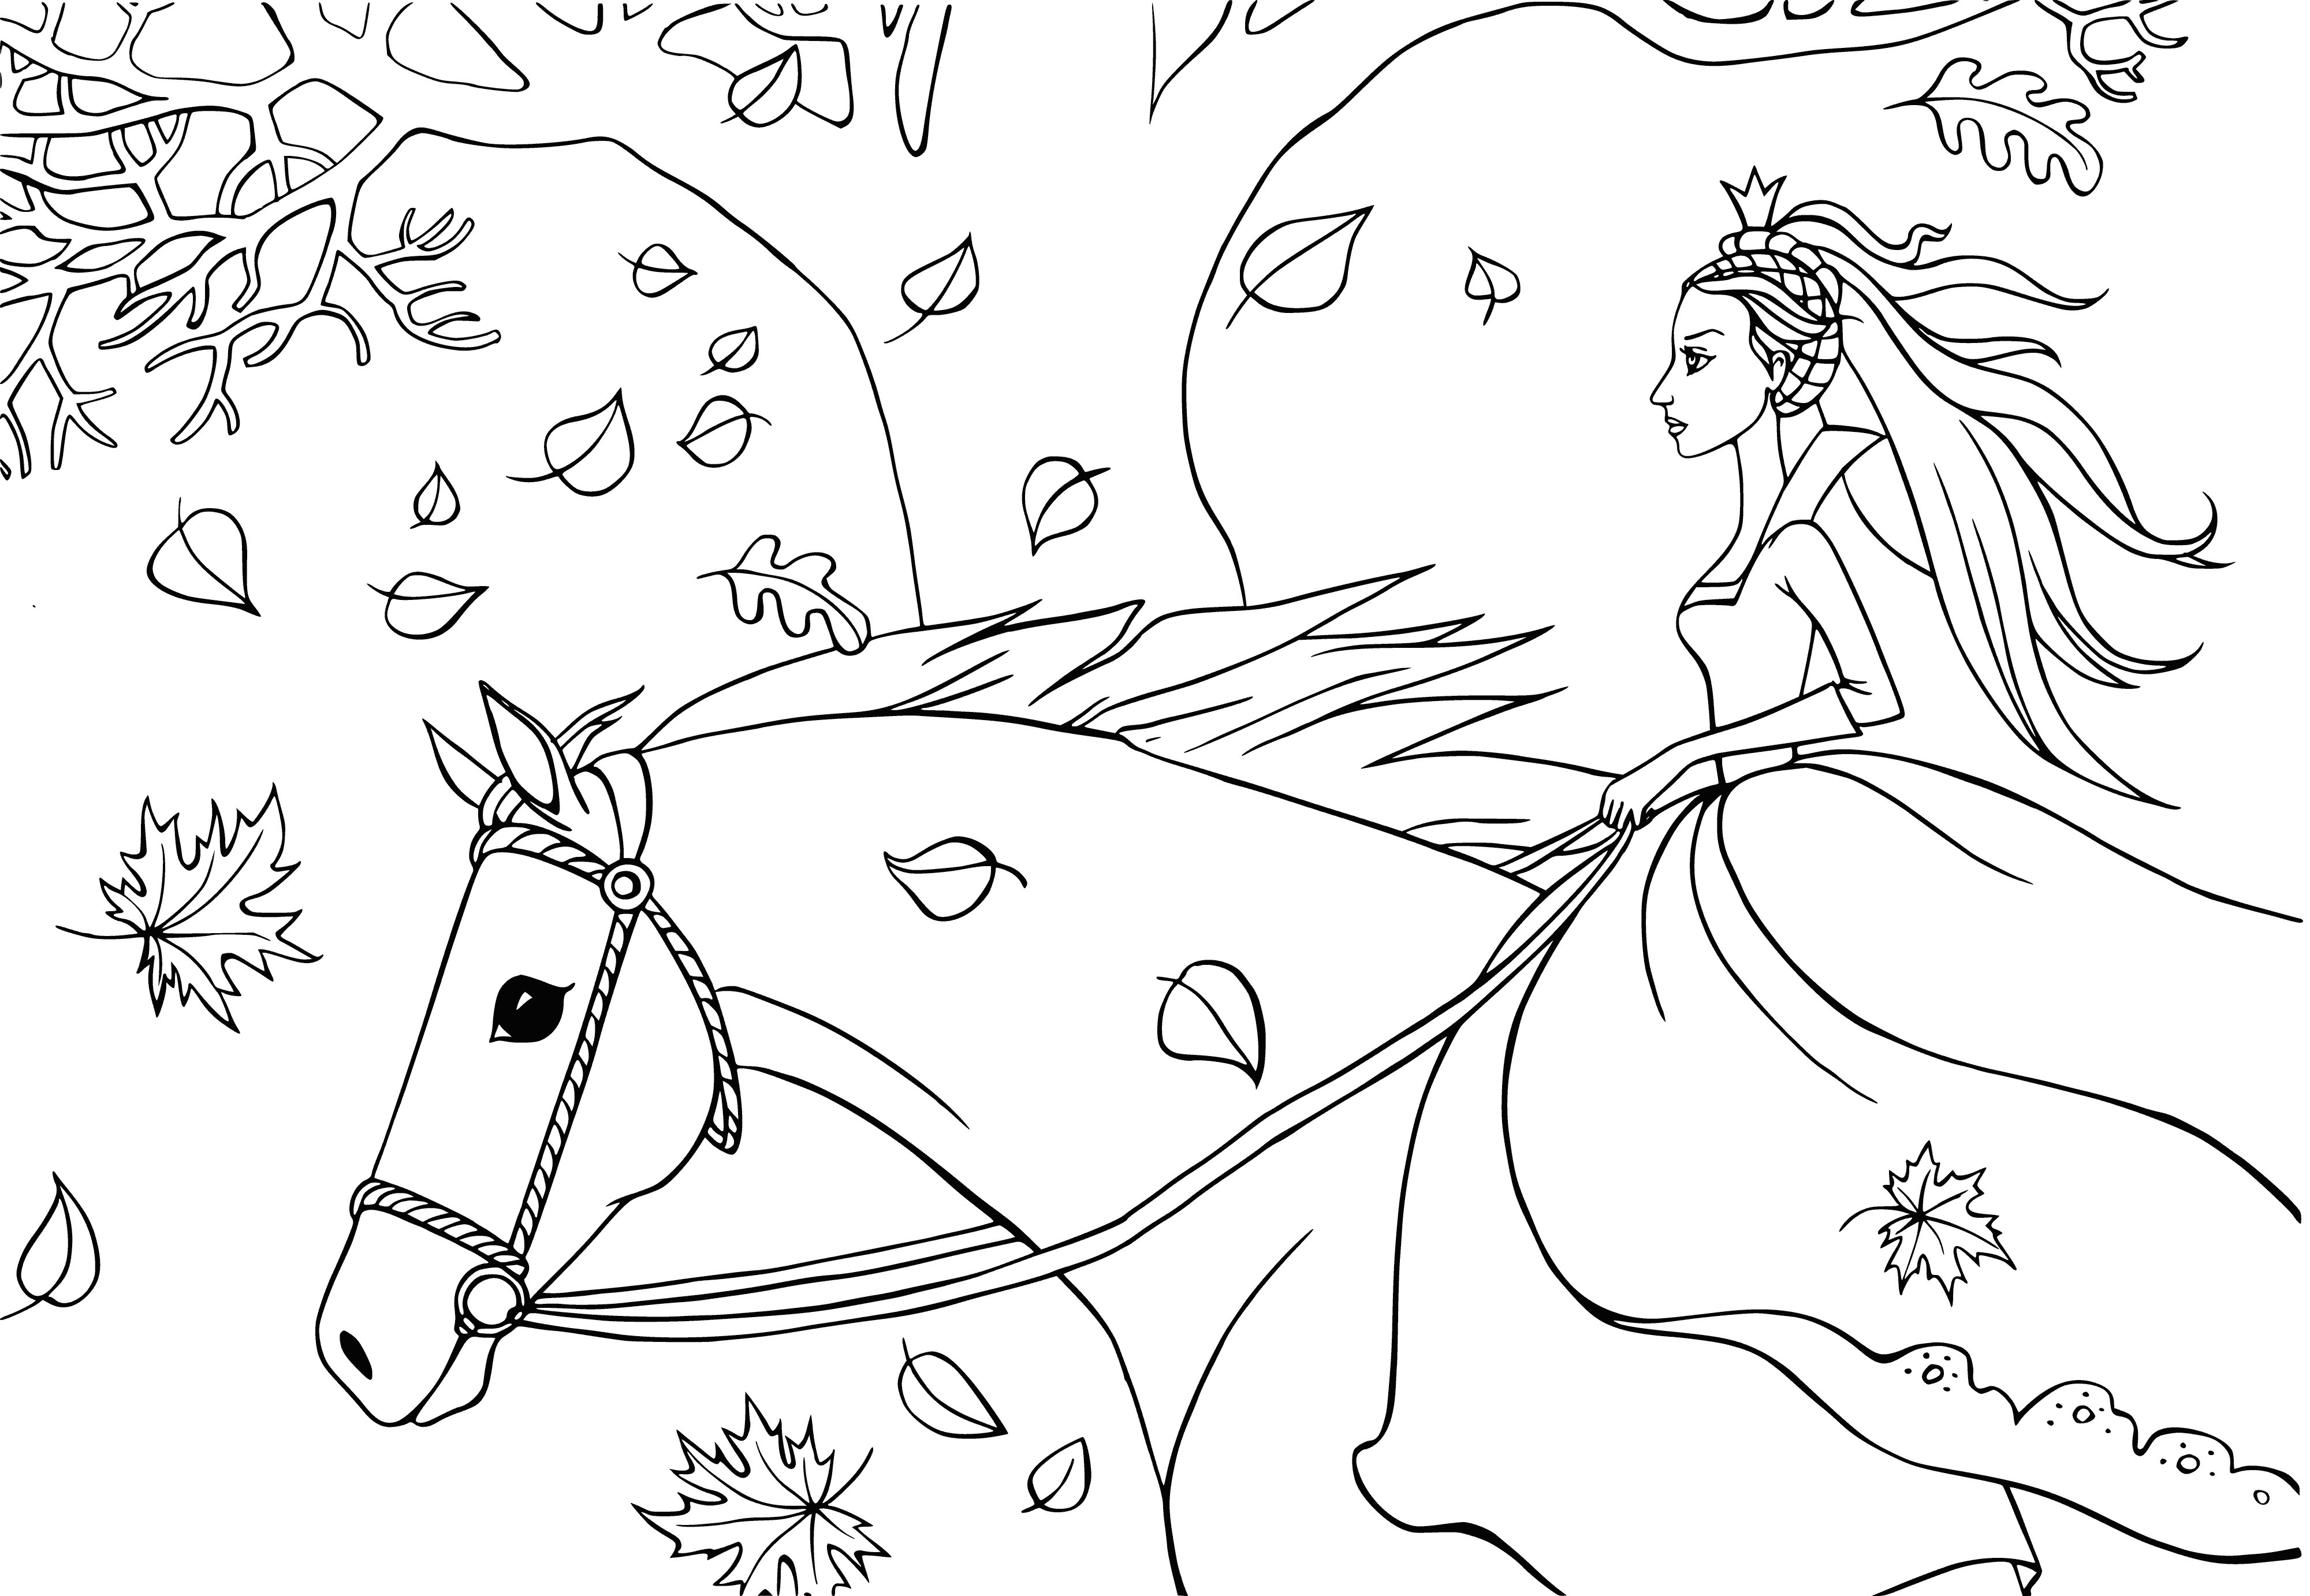 coloring page: The Fairy kingdom is a magical place of horseback riding & a huge castle with a big red door & gold knocker, surrounded by a big green forest. #fairytale #magical